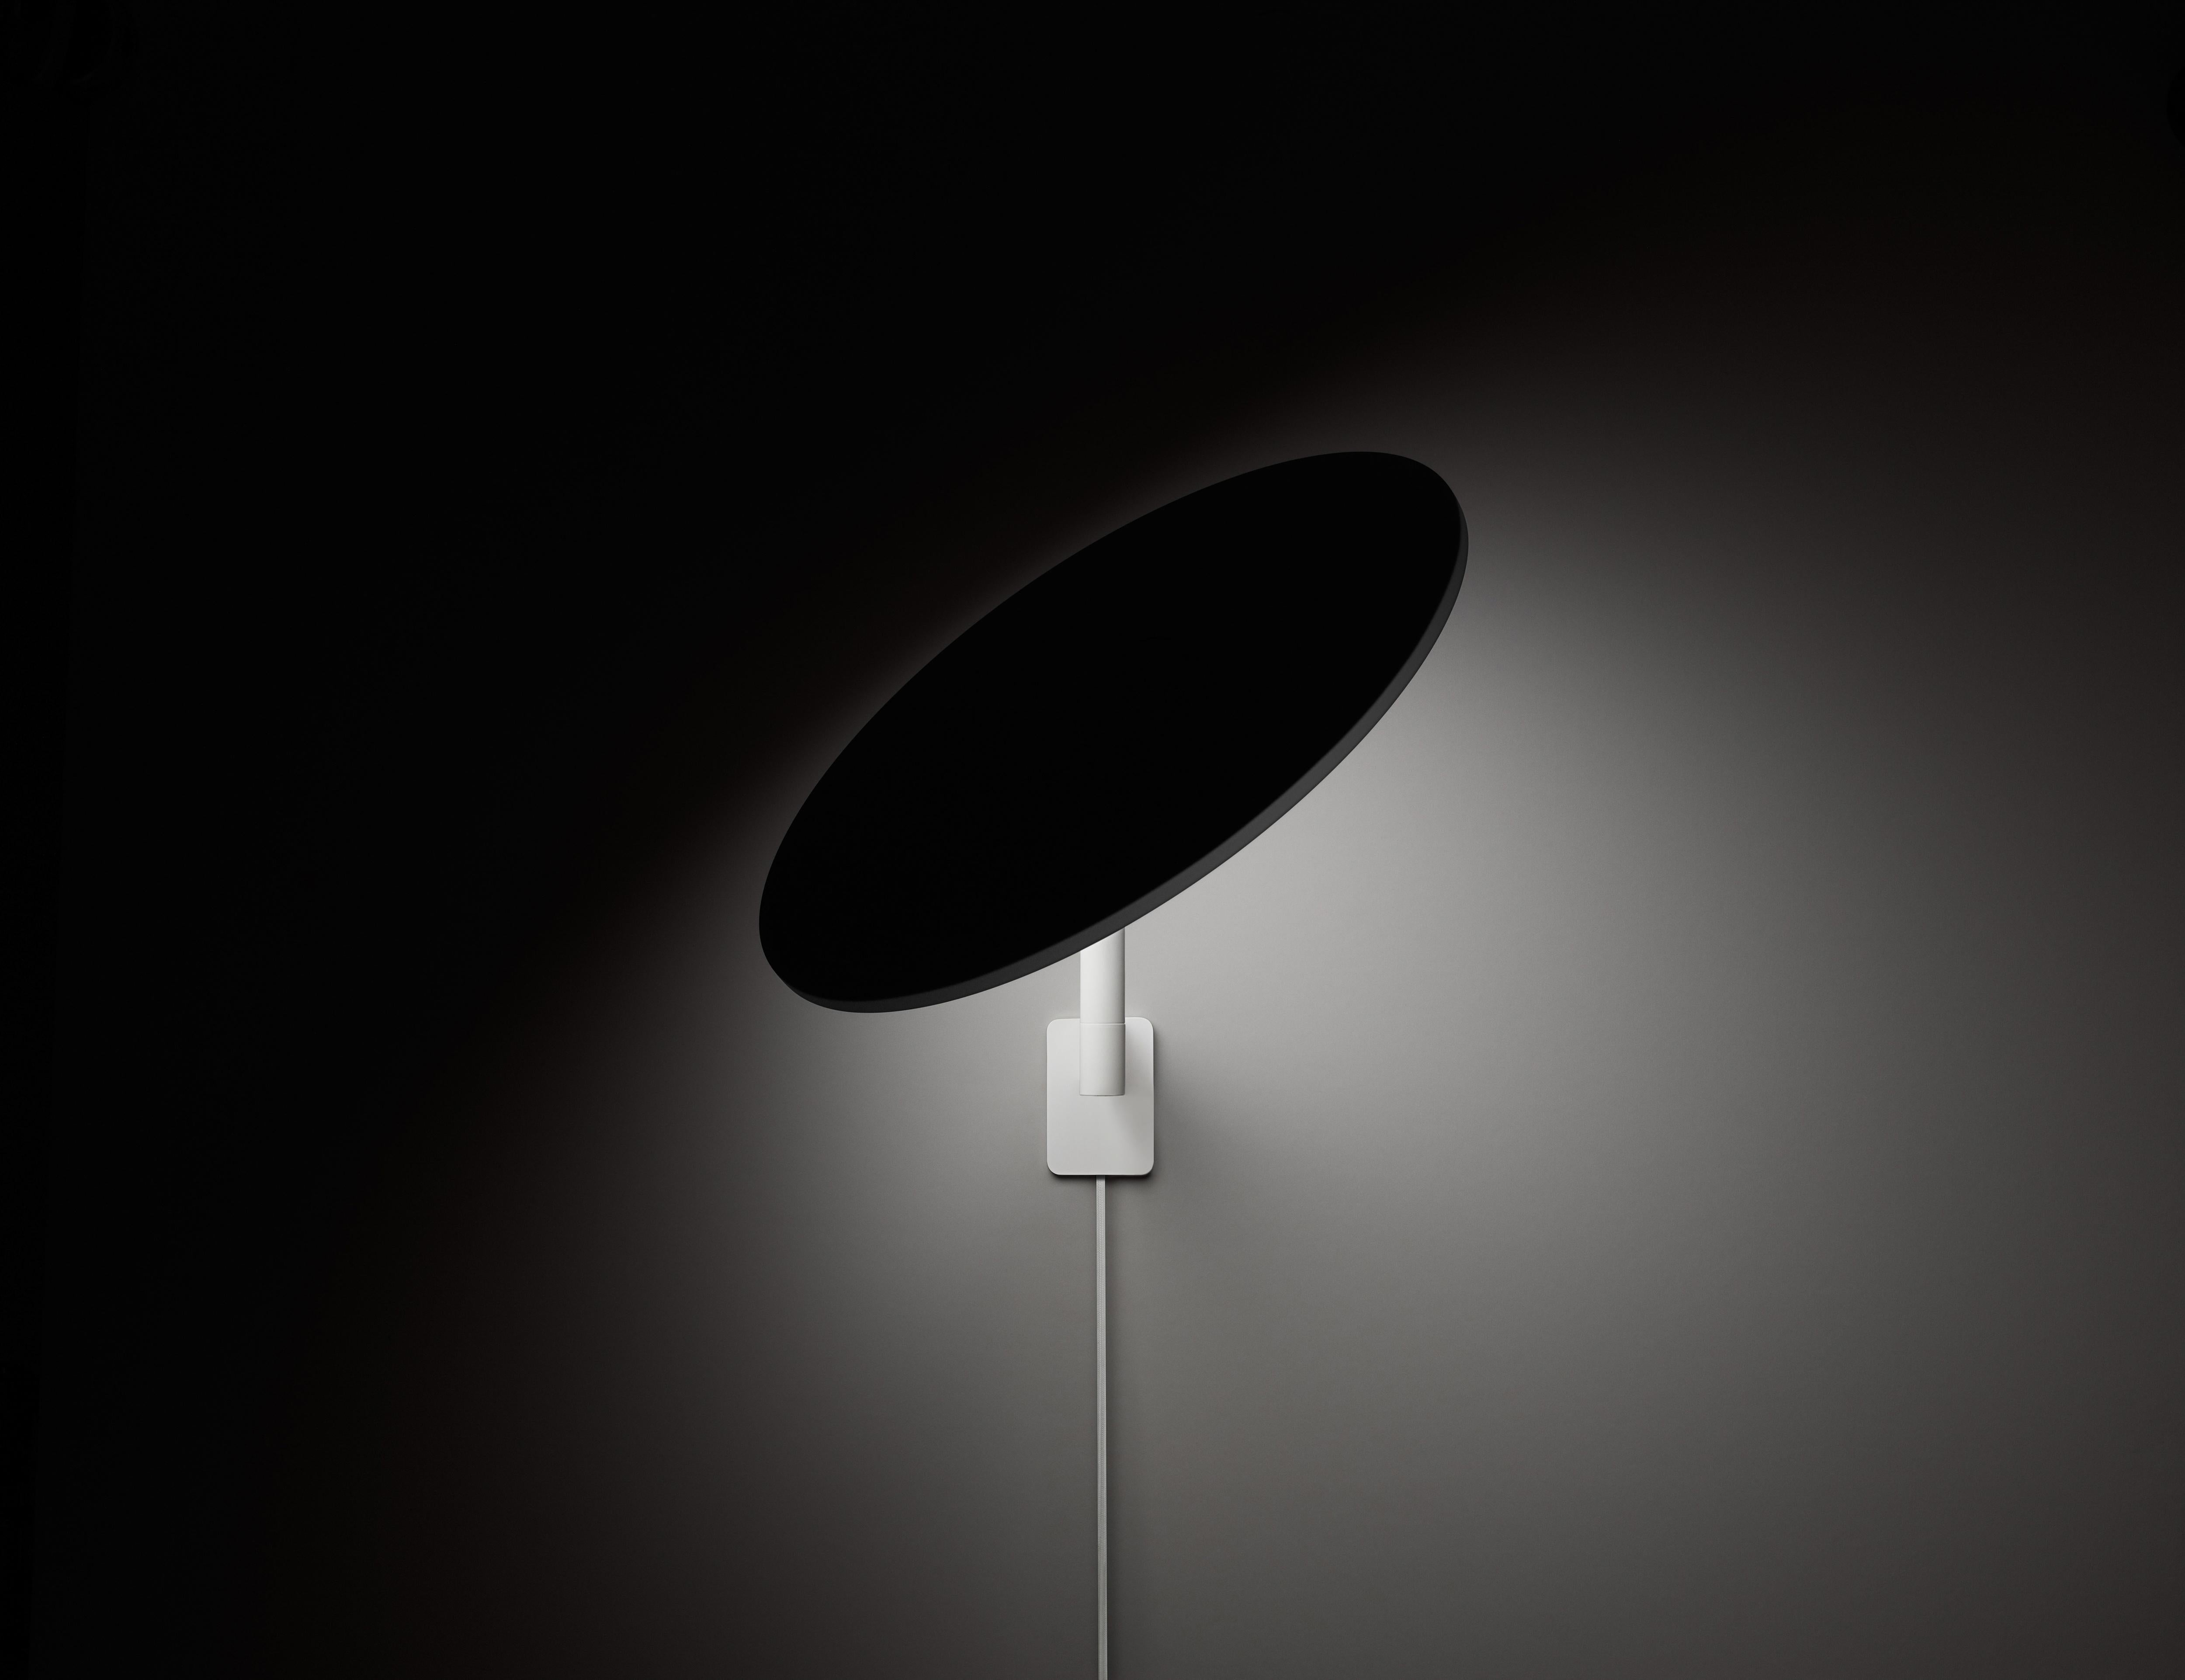 Circa’s revolutionary flat-panel LED light source combines seamless movement with warm and balanced illumination. Through its integrated USB charging port, 45° shade tilt and 360° rotation, Circa redefines the ambient lighting category. Circa is